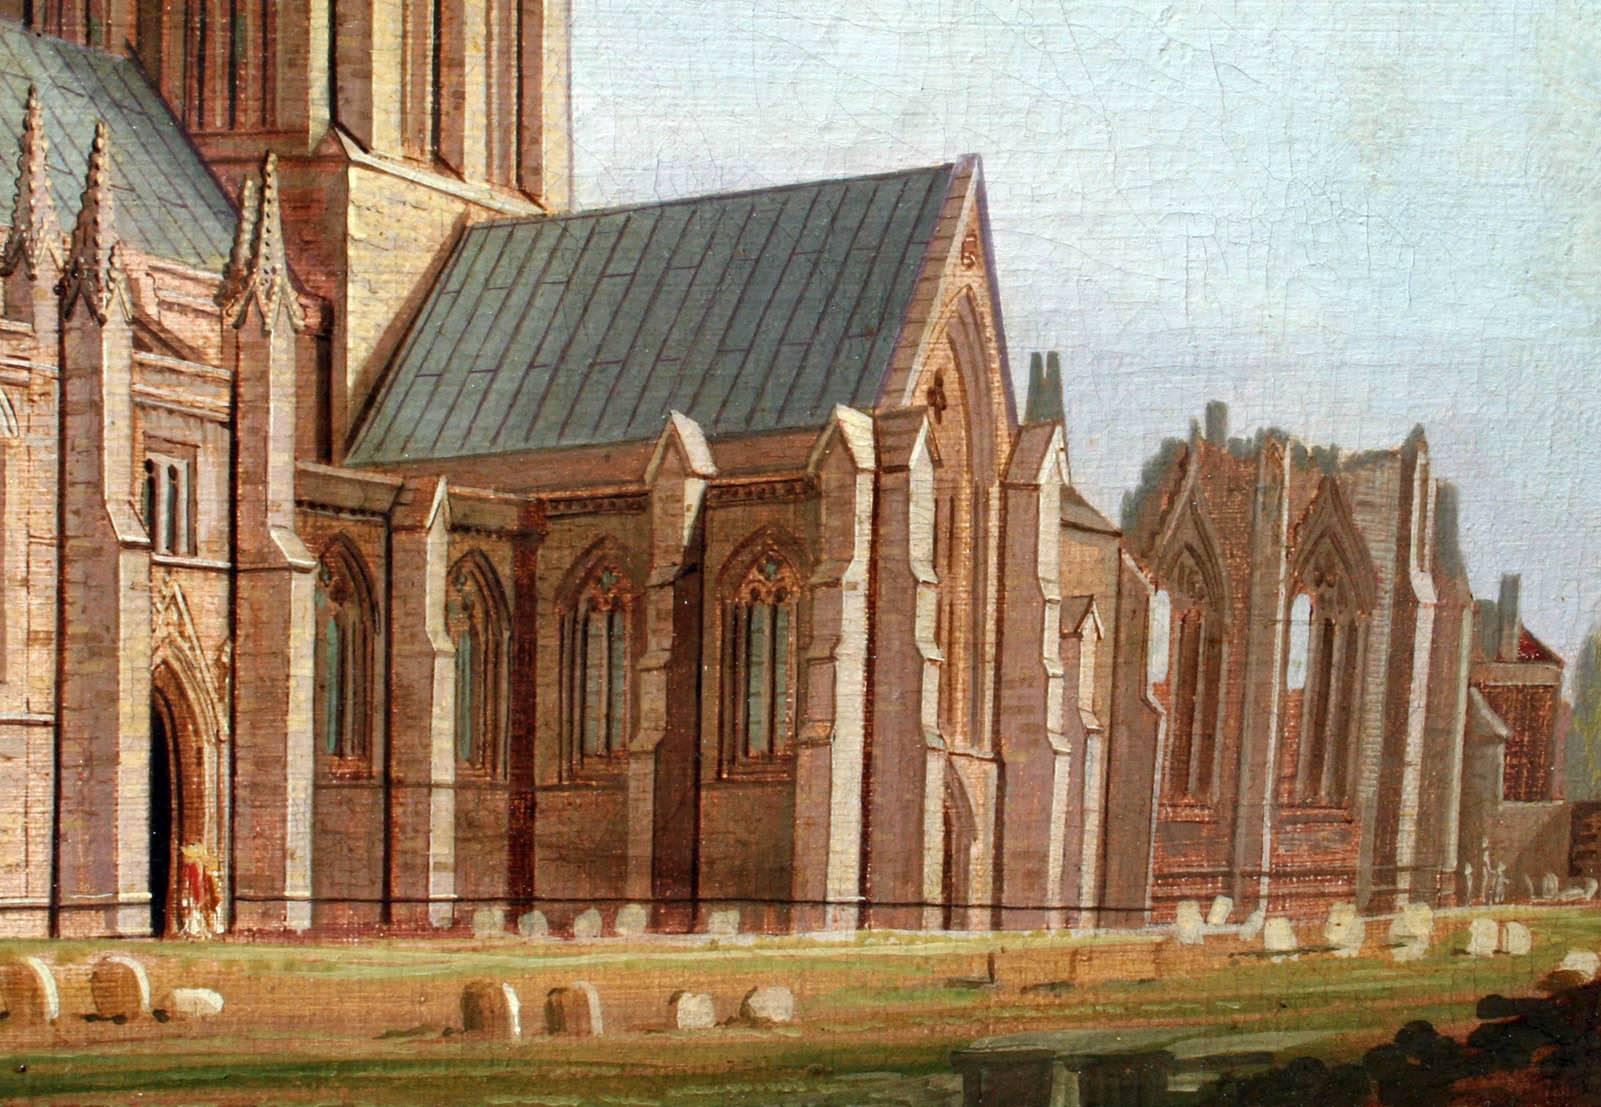 John Widdas (English, 1802-1858)

Howden Minster, East Riding, Yorkshire 

Oil on canvas, signed and dated: “1828”.

Painting size: 19” x 28”
Frame size: 27” x 36”
SAFA/6283

A resident of Hull, Widdas was best known as a portrait painter.